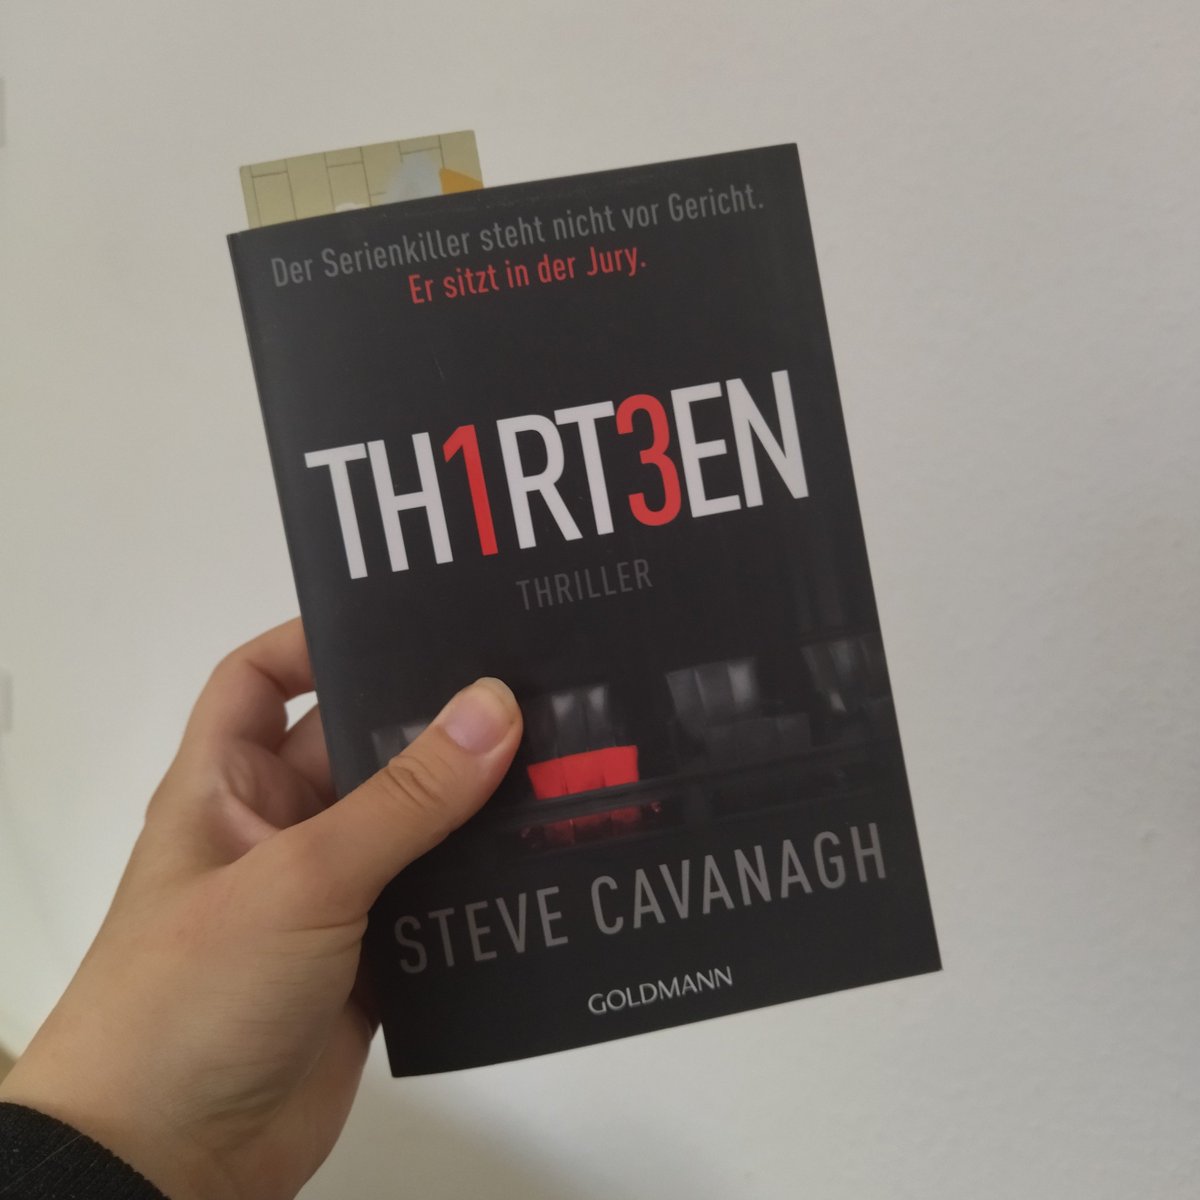 #currentlyreading

thirteen
539 pages